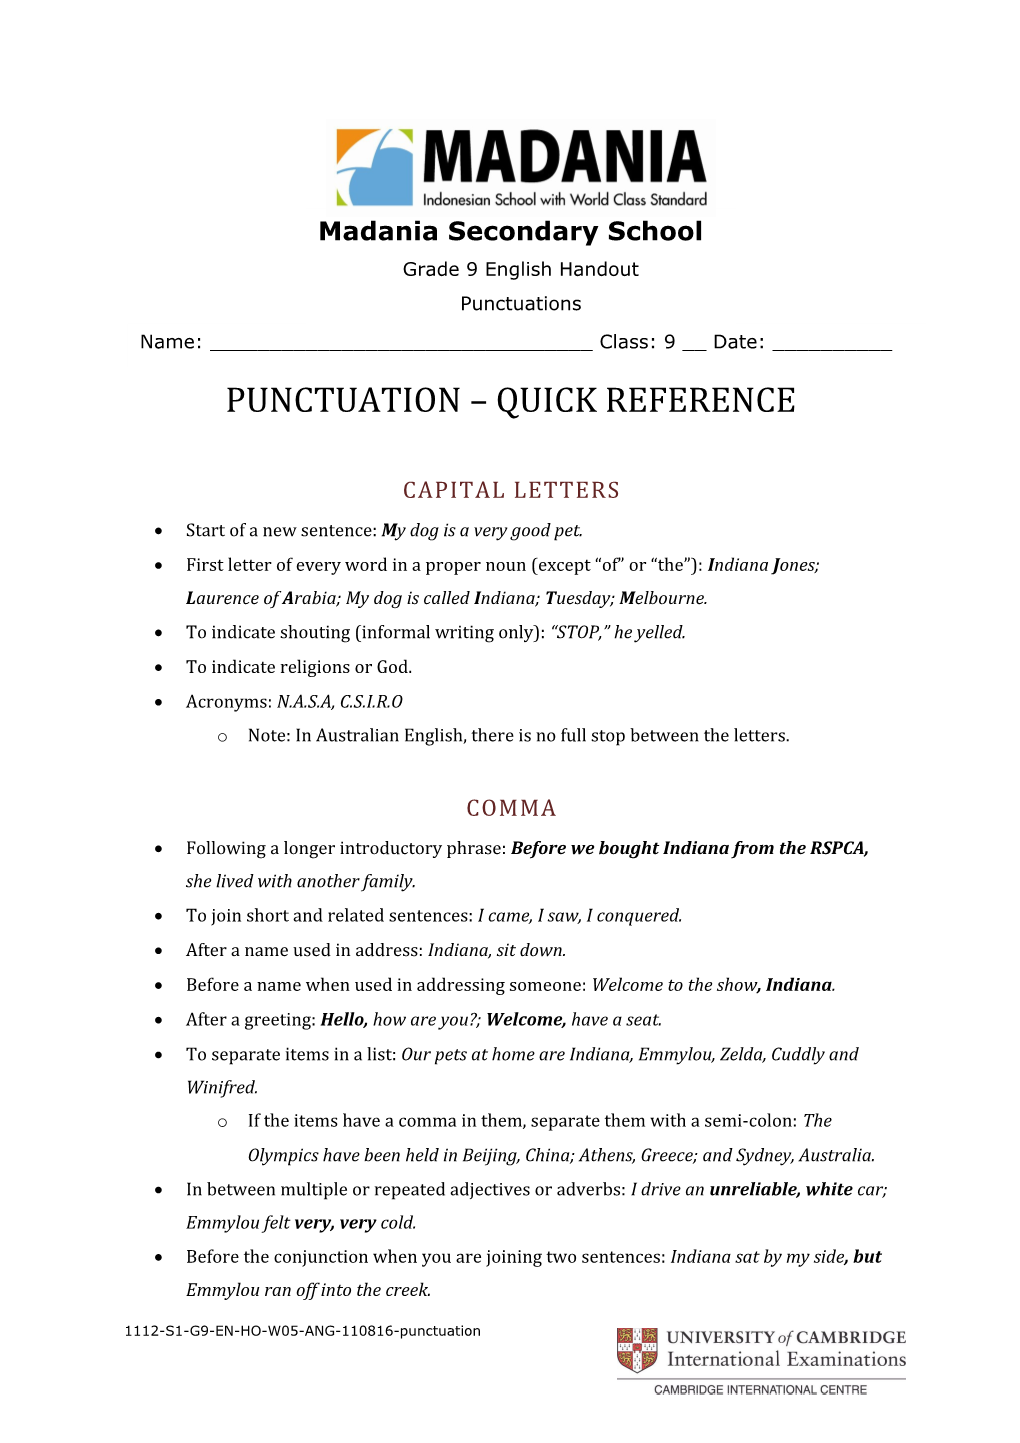 Punctuation Quick Reference